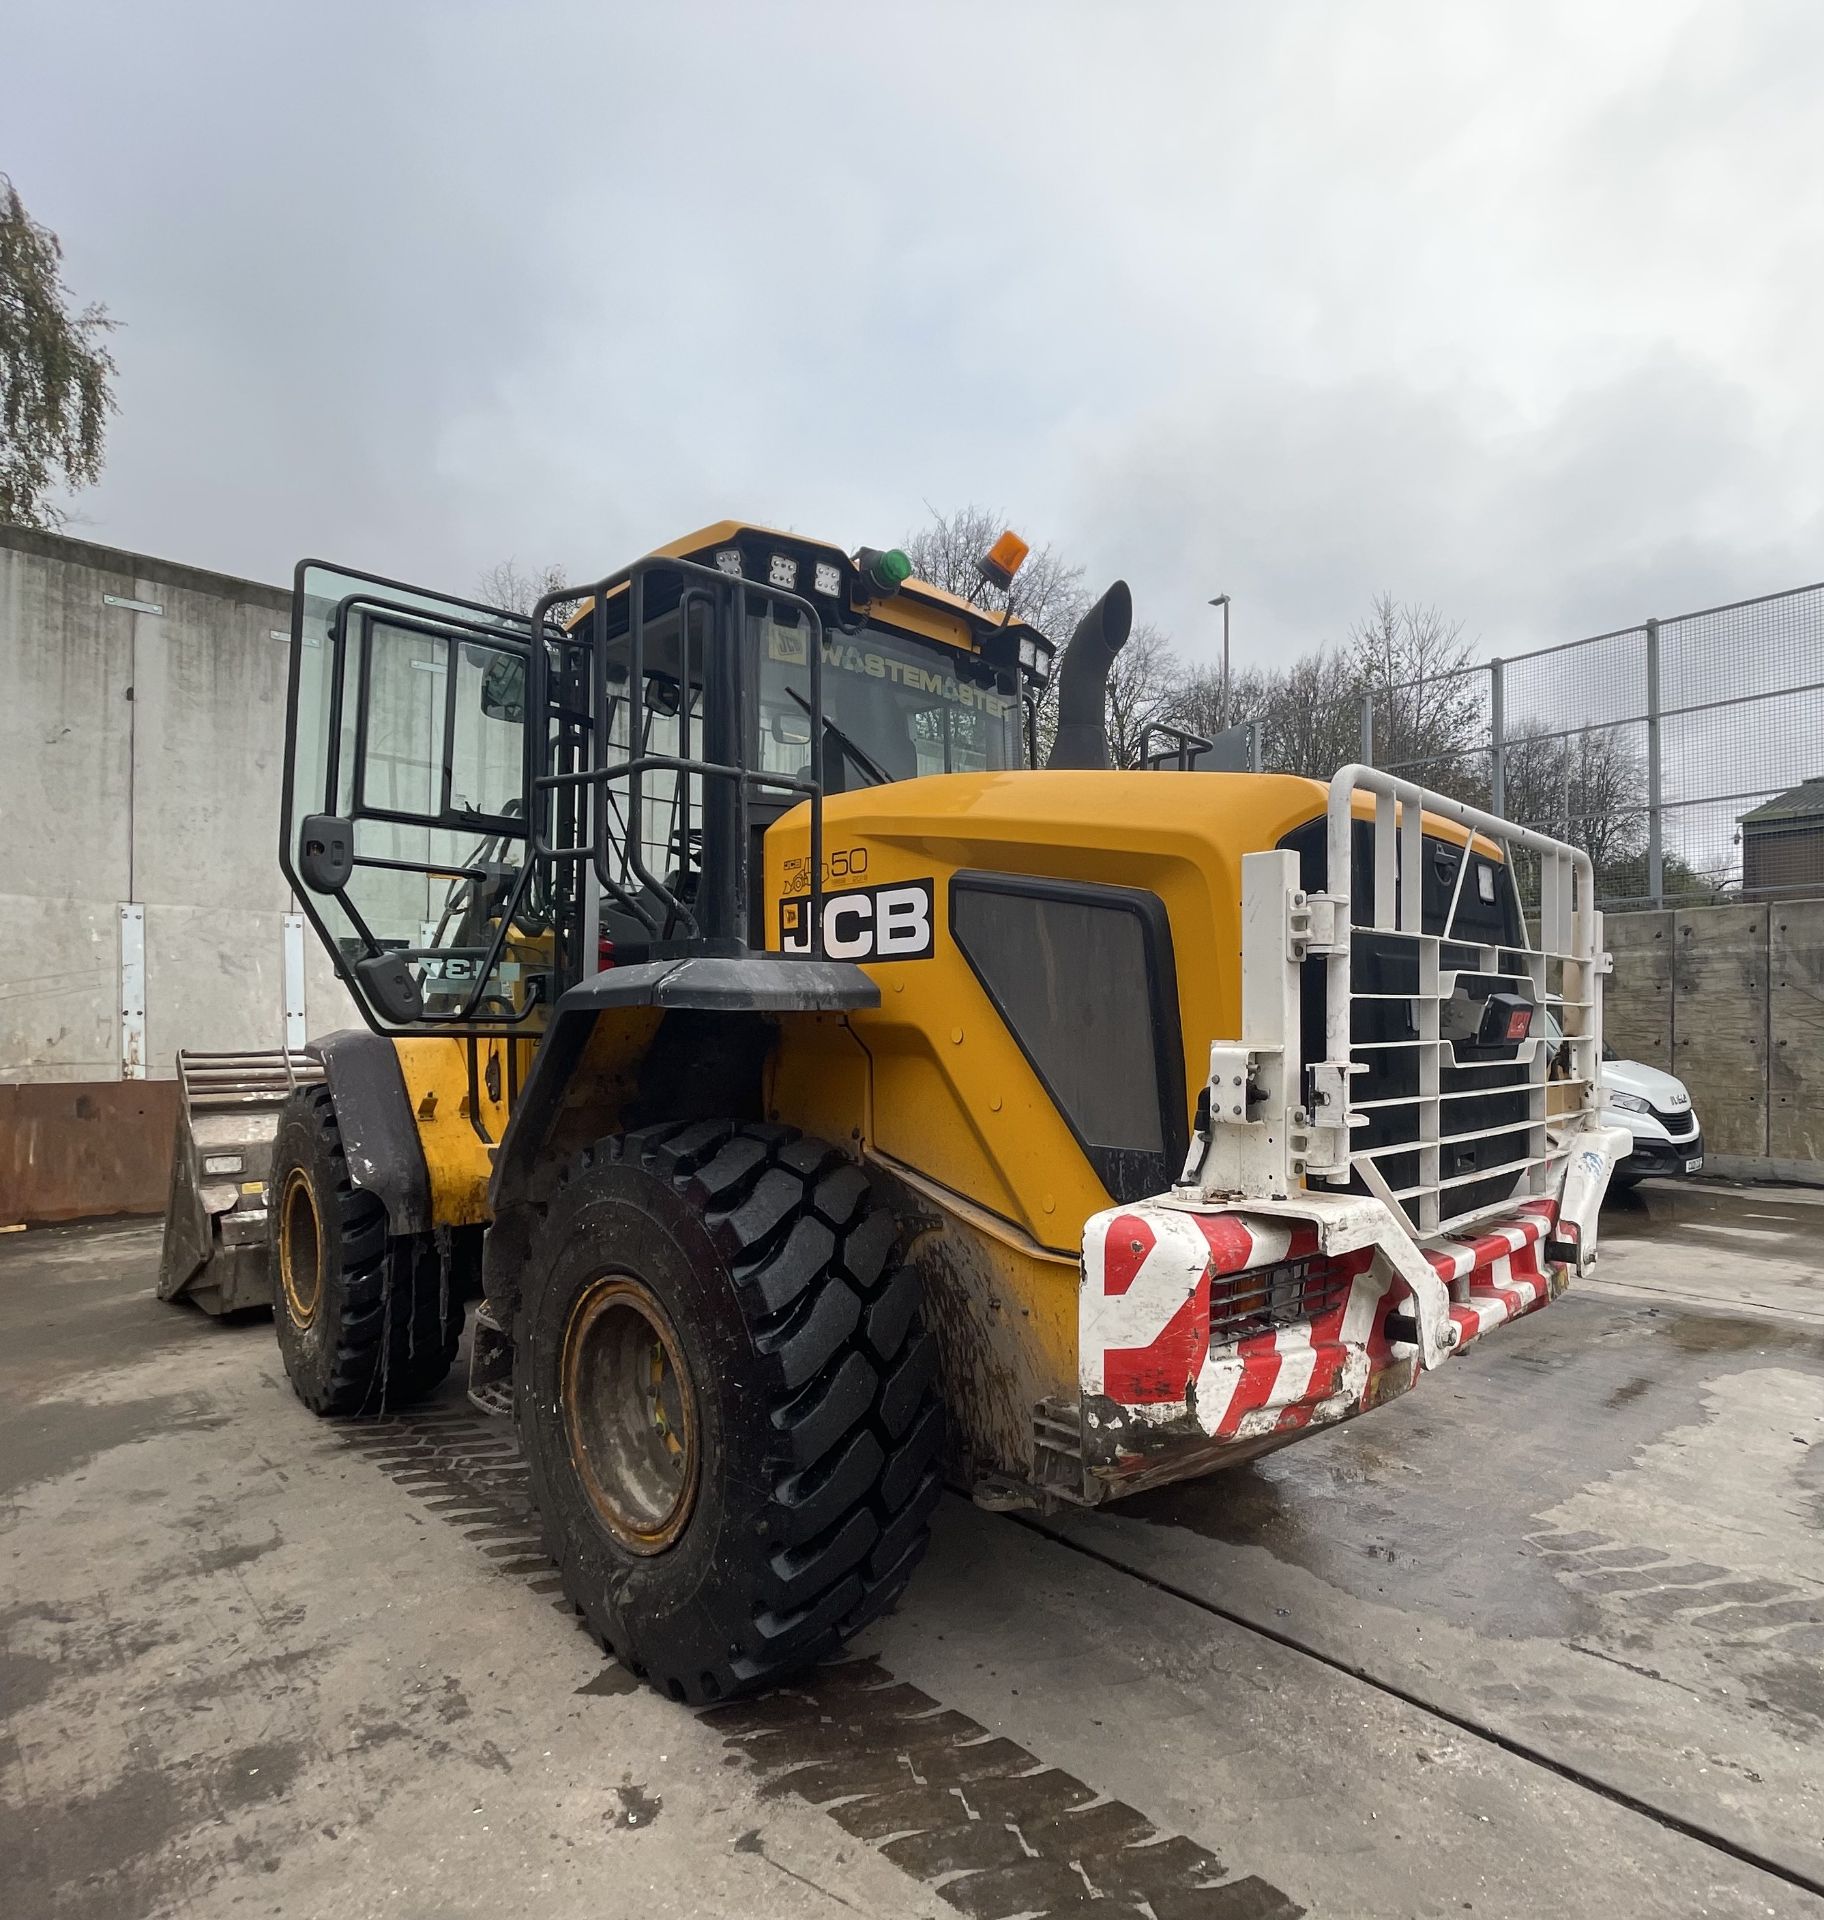 JCB, Wastemaster 437 S5, wheel loader, PIN: JCB4A8AAVK2680410 (DOM 2019), Last known Hours 3739.9, - Image 21 of 22